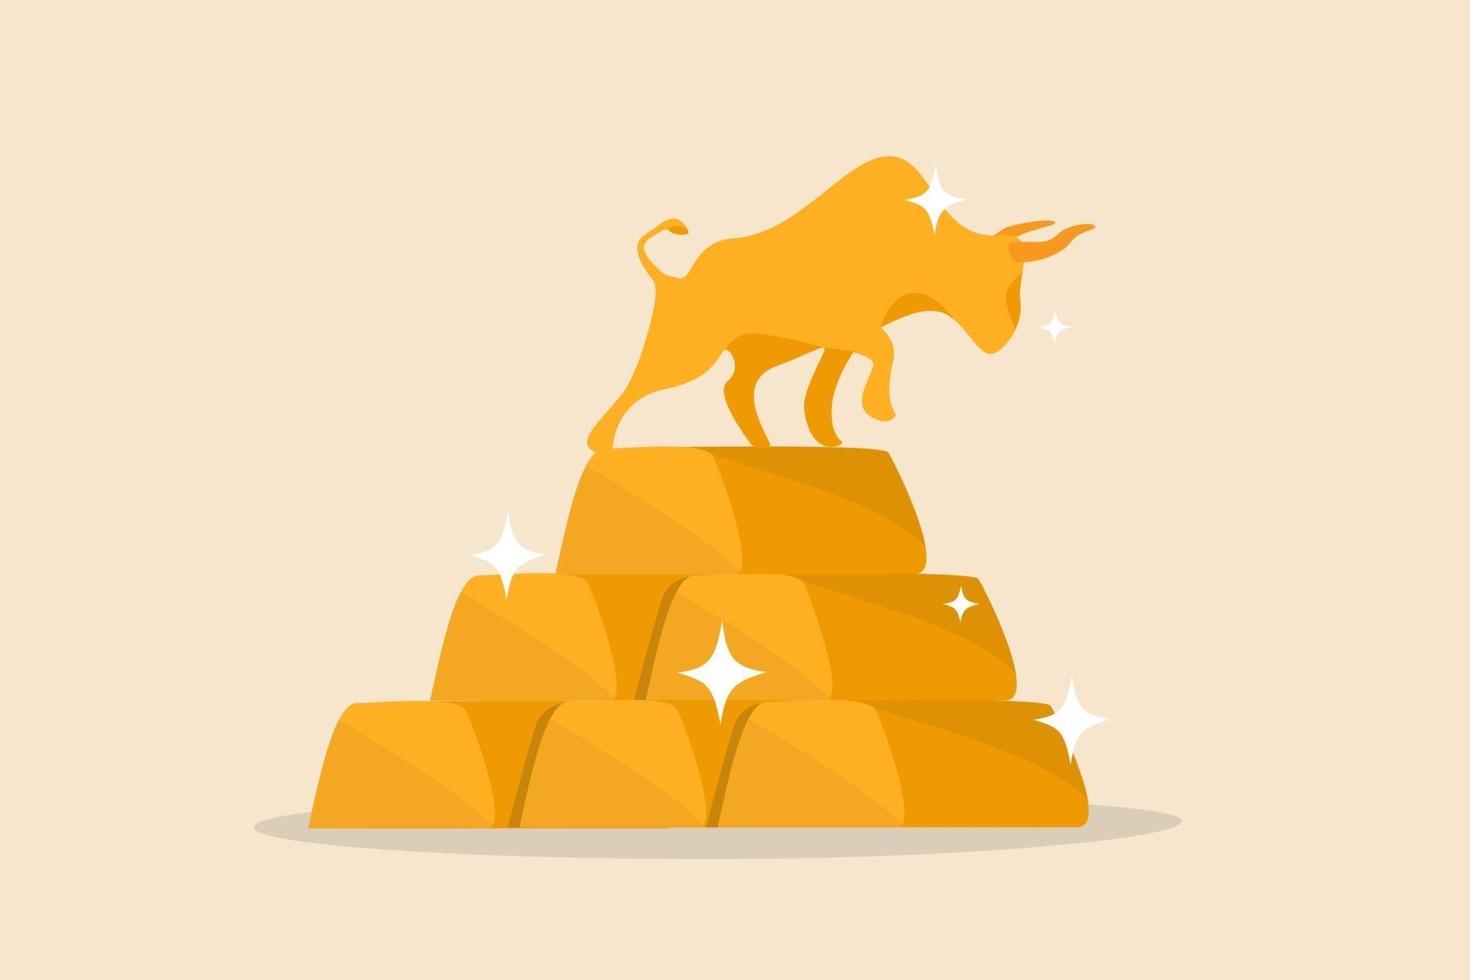 Gold investment bull market, safe haven in financial crisis or gold price rising vector